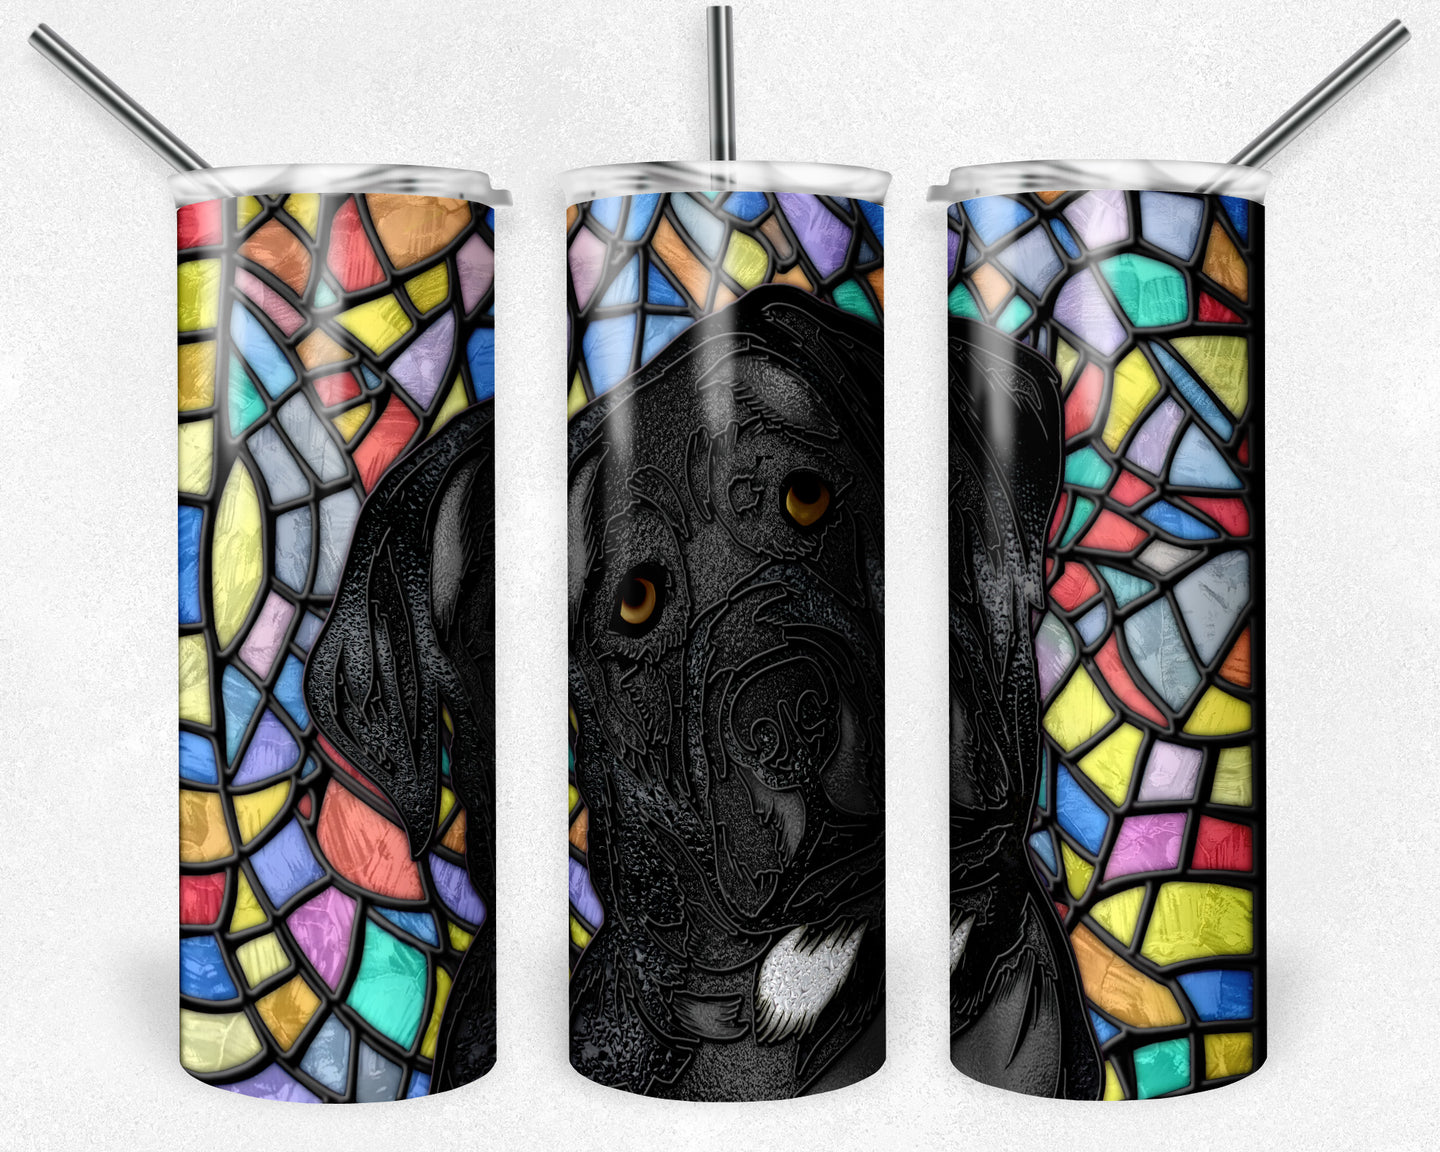 Black Lab Dog Stained Glass